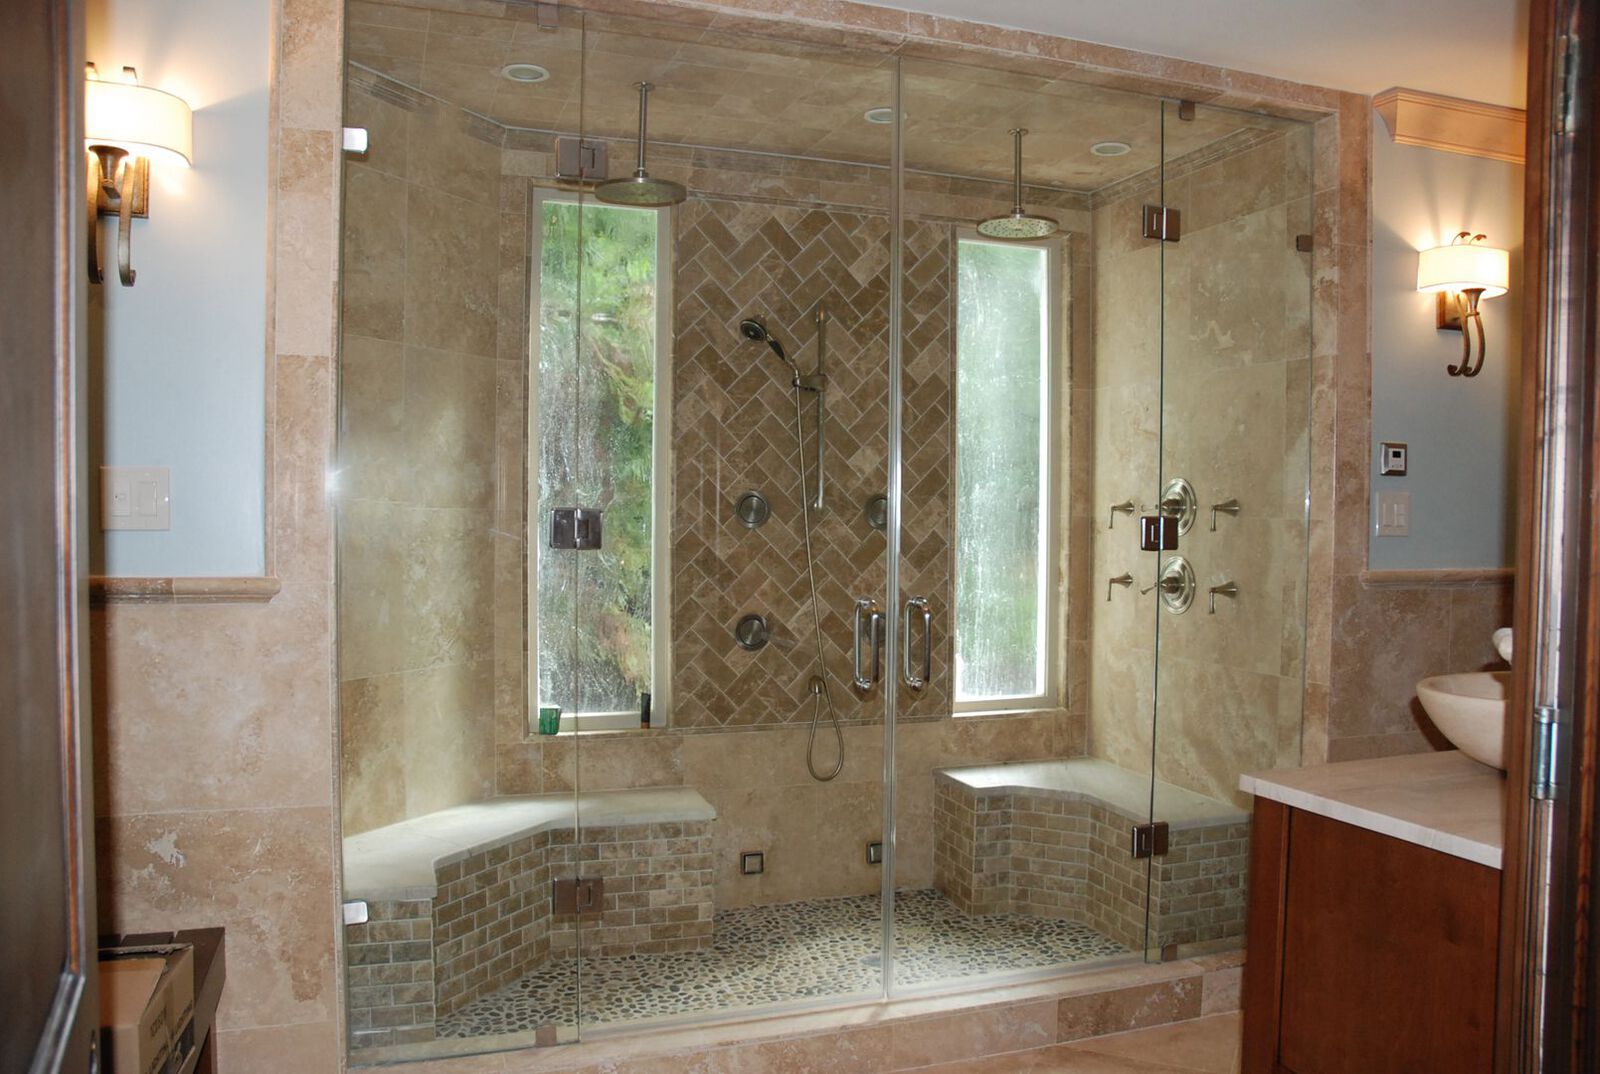 Giant Steam Shower. This enclosure has French doors that are supported by flanking glass panels. Each door is hinged off adjacent glass panels using glass to glass hinges. Panels are physically fastened into walls using 2"x2" metal glass clamps.